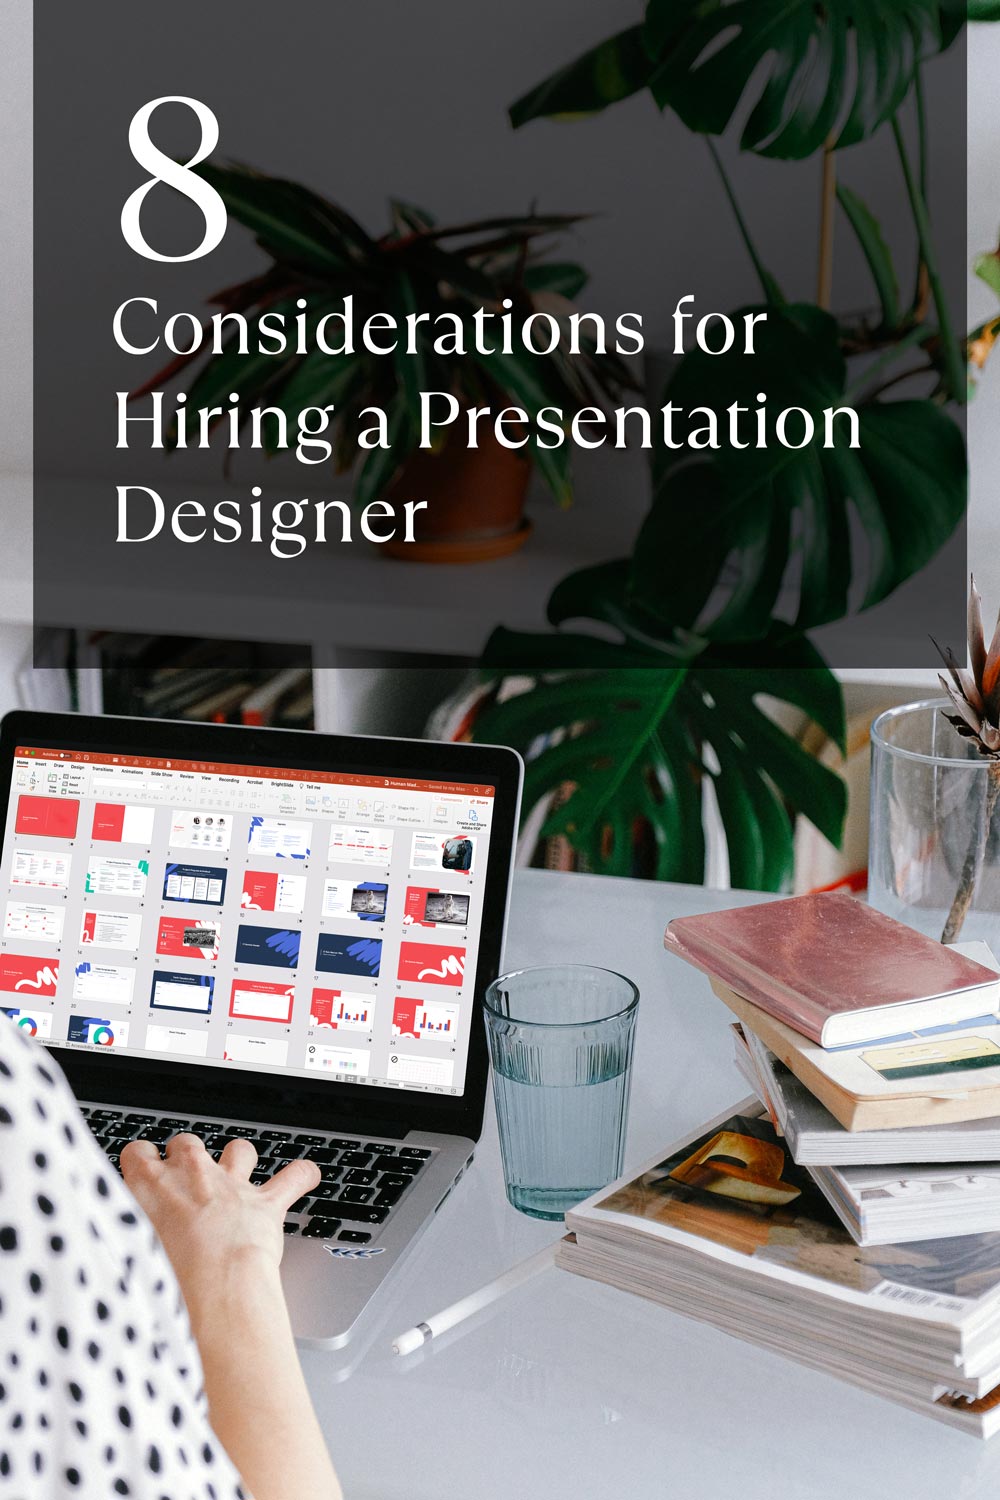 8 considerations for hiring a presentation designer text on closeup image of woman working on her computer infront of powerpoint slides